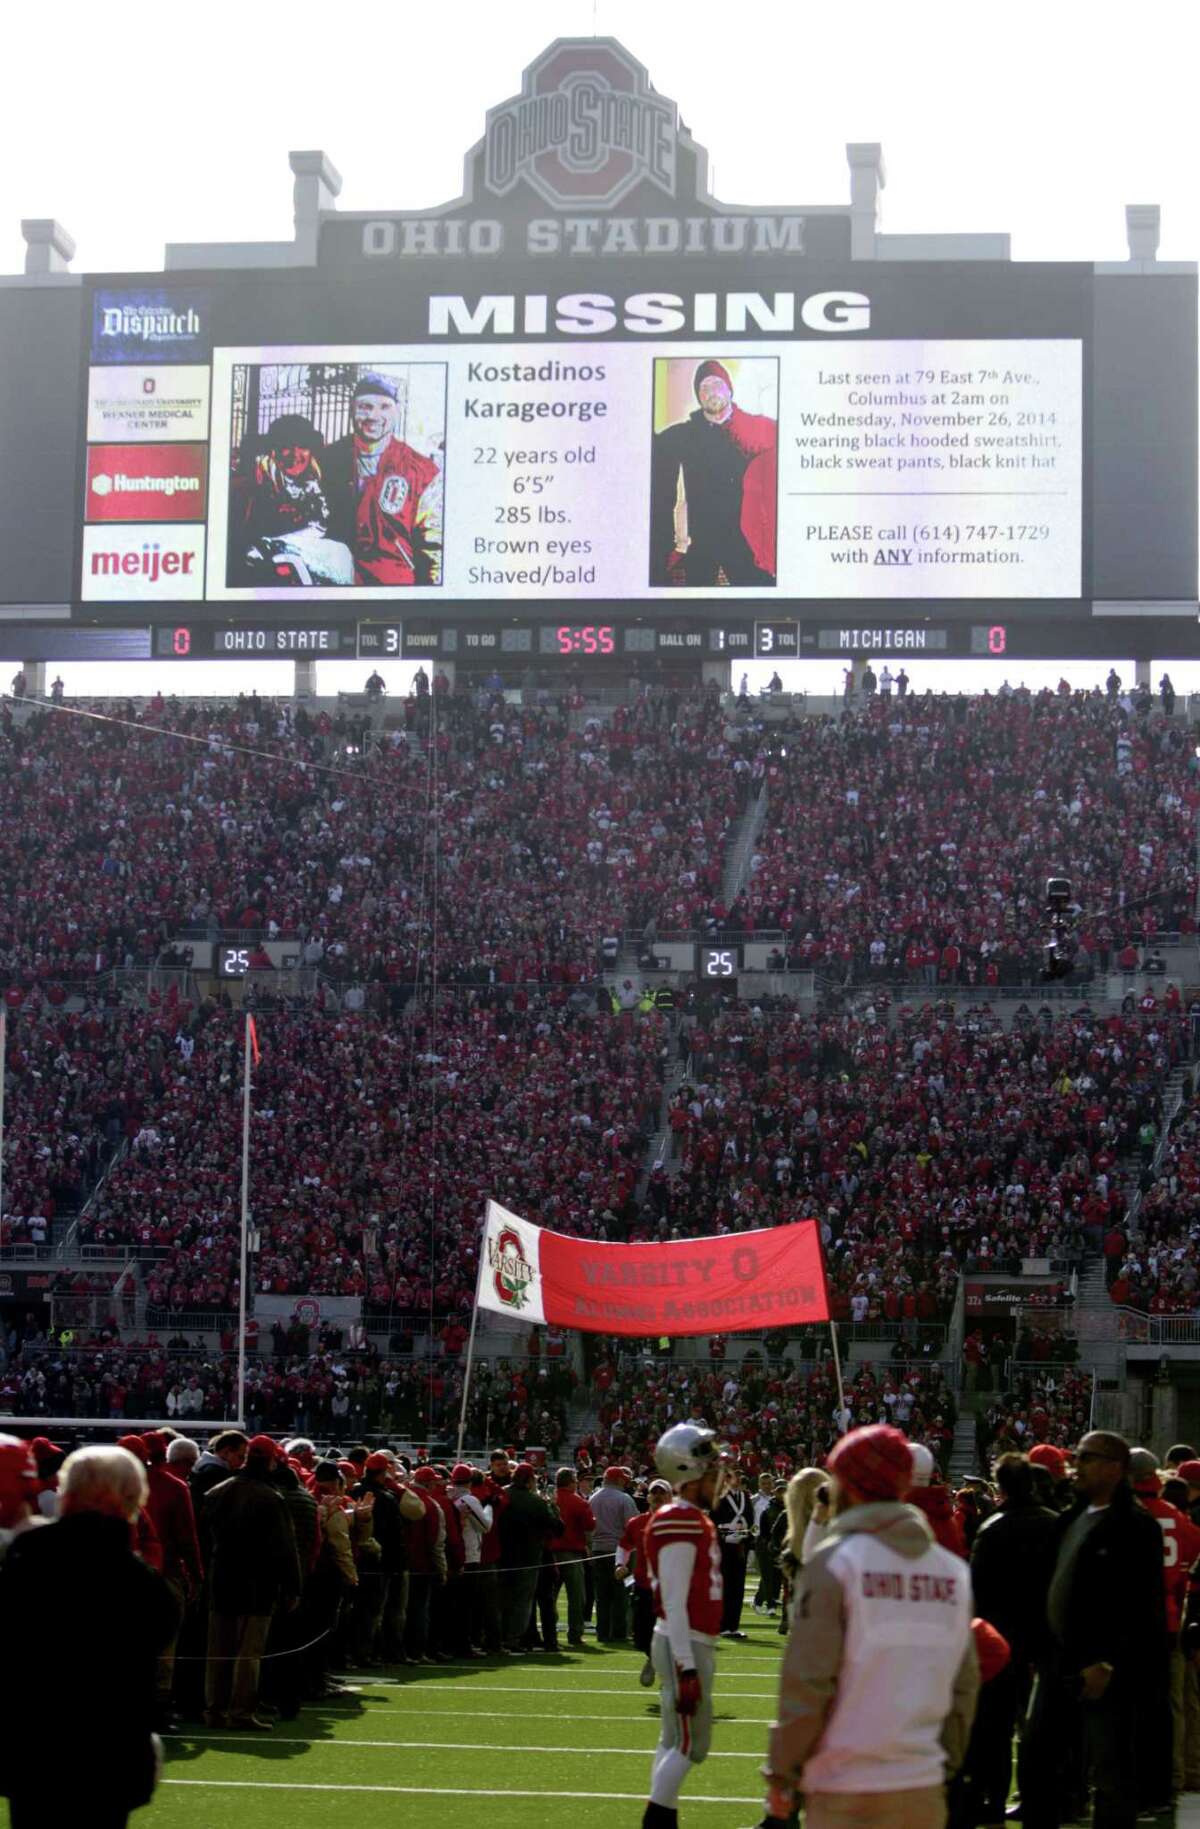 FILE - In this Nov. 29, 2014, file photo, a police poster showing Kosta Karageorge, an Ohio State player who has been missing since earlier in the week, is displayed on the large video board at the south end of the field before the Ohio State NCAA college football game against Michigan in Columbus, Ohio. Police tell media outlets Sunday, Nov. 30, 2014, they believe a body found near the campus was that of 22-year-old Karageorge.